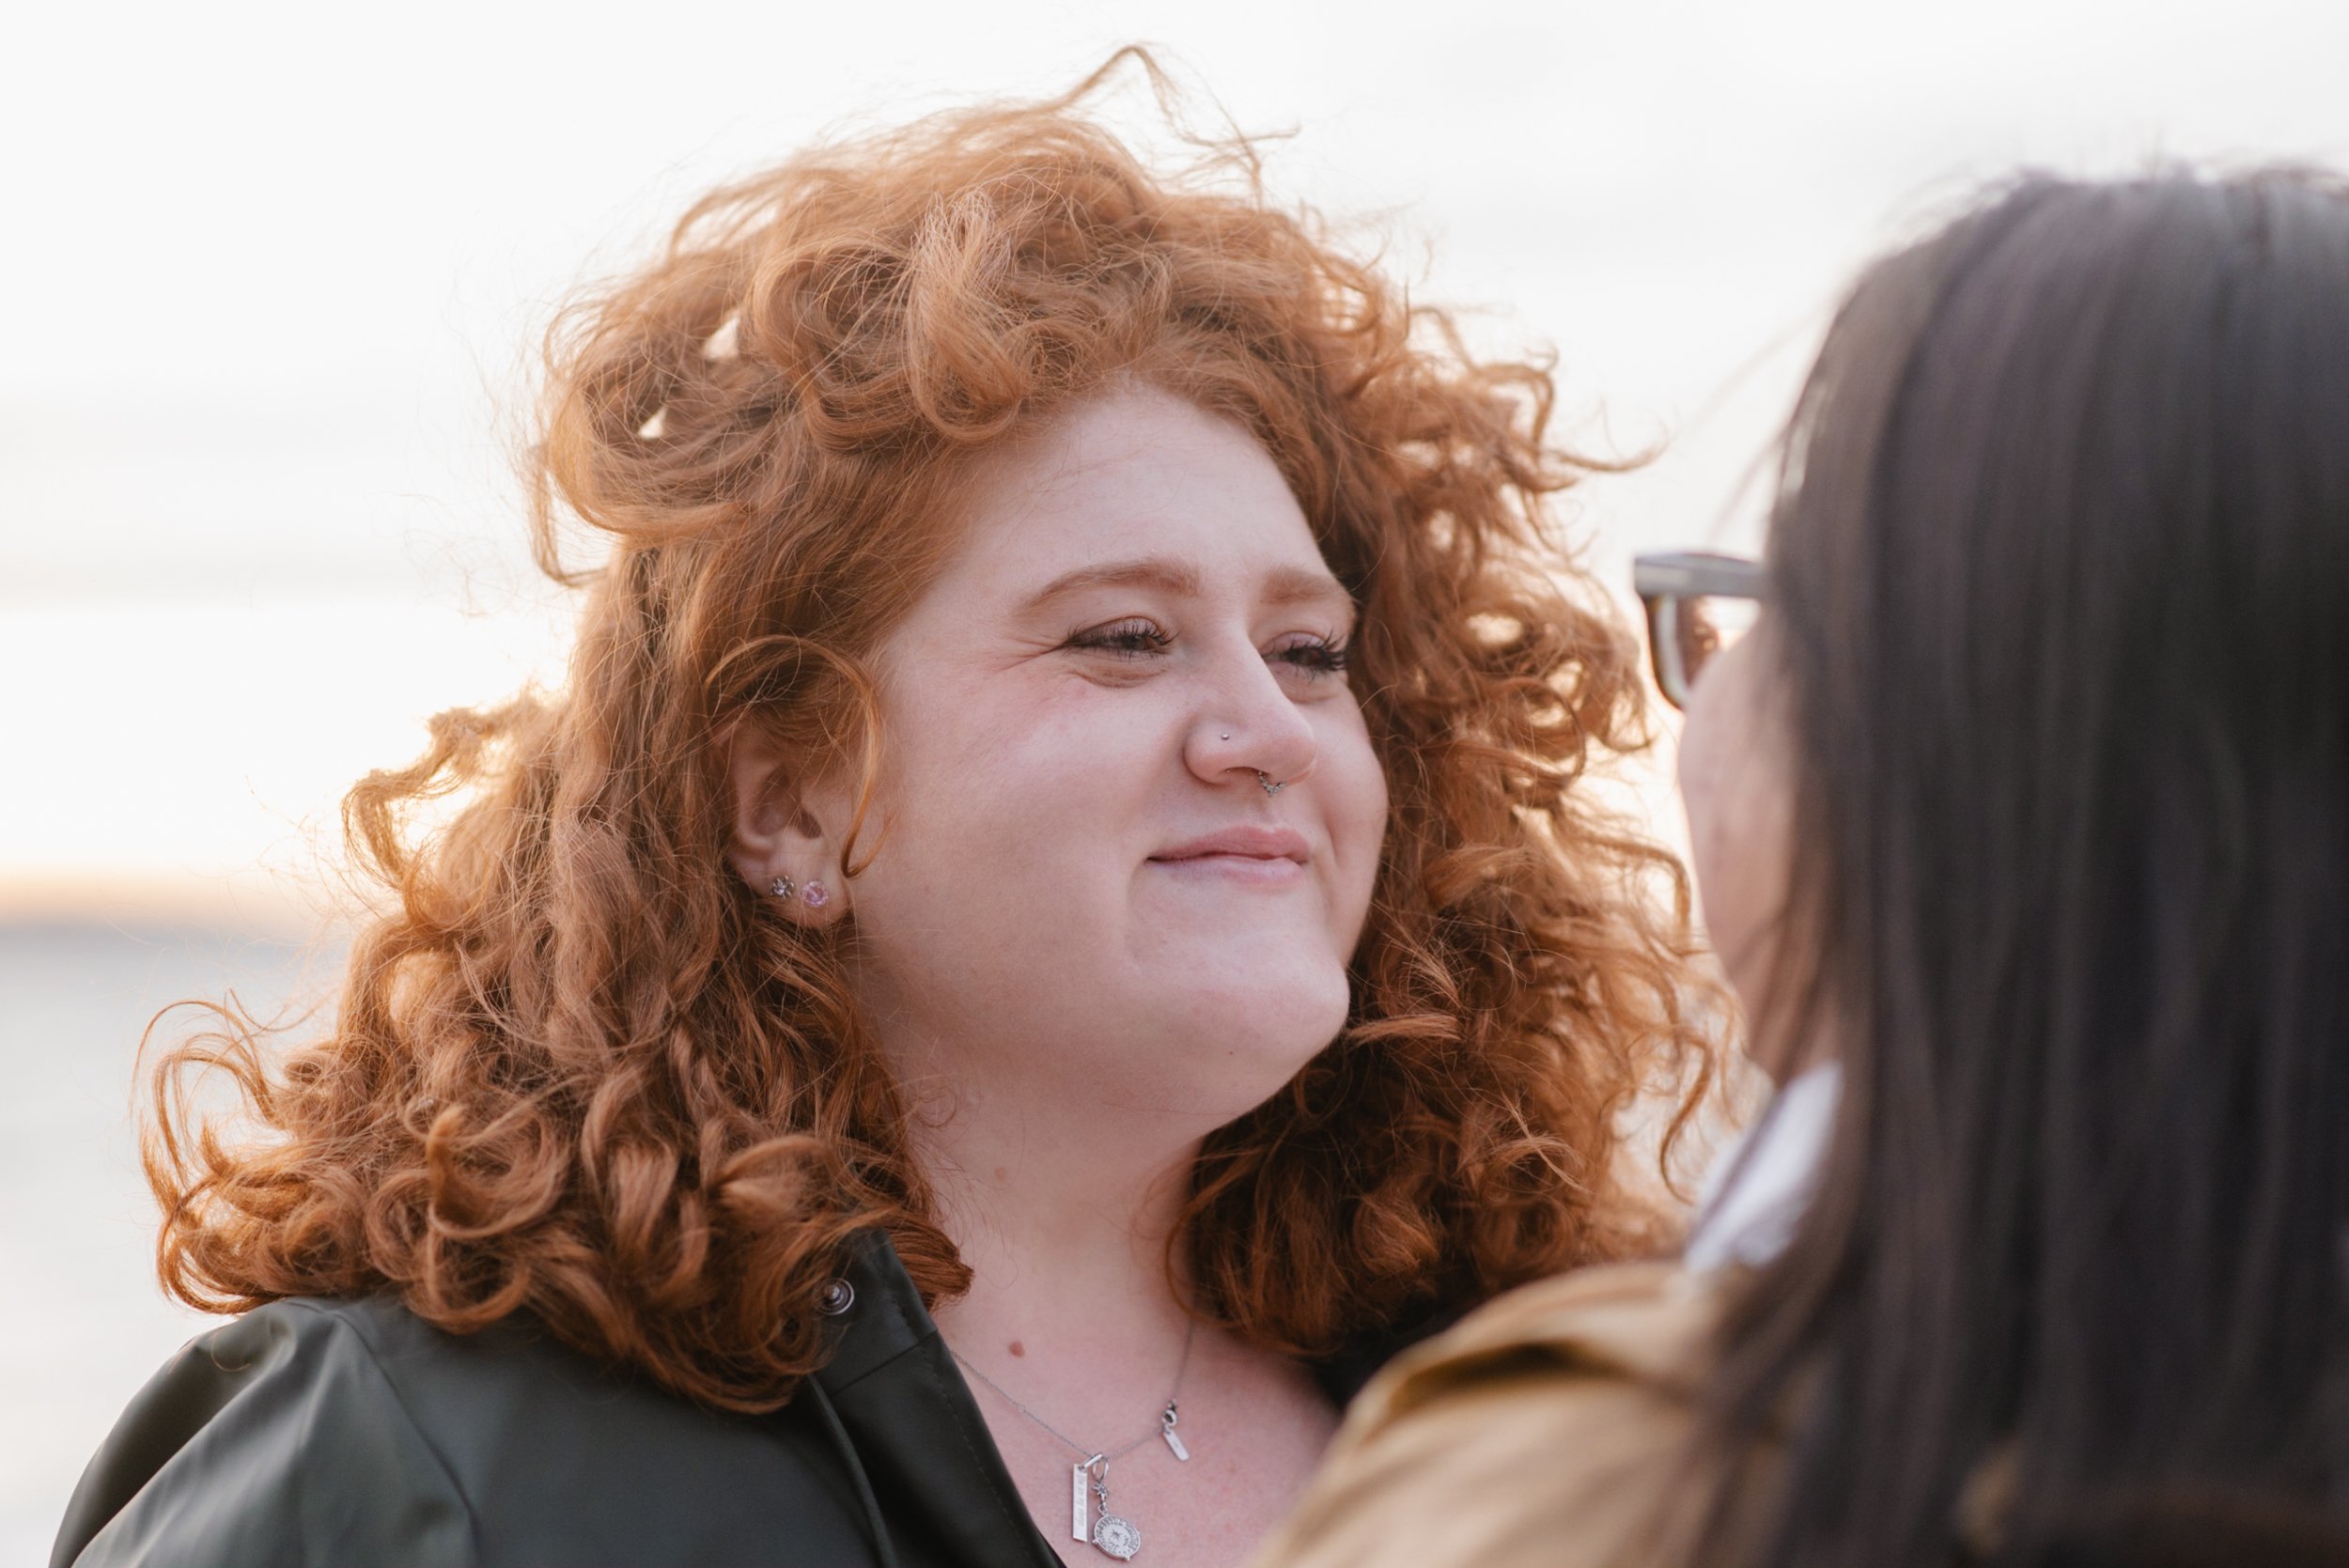 Woman with red curly hair smiling at partner lovingly